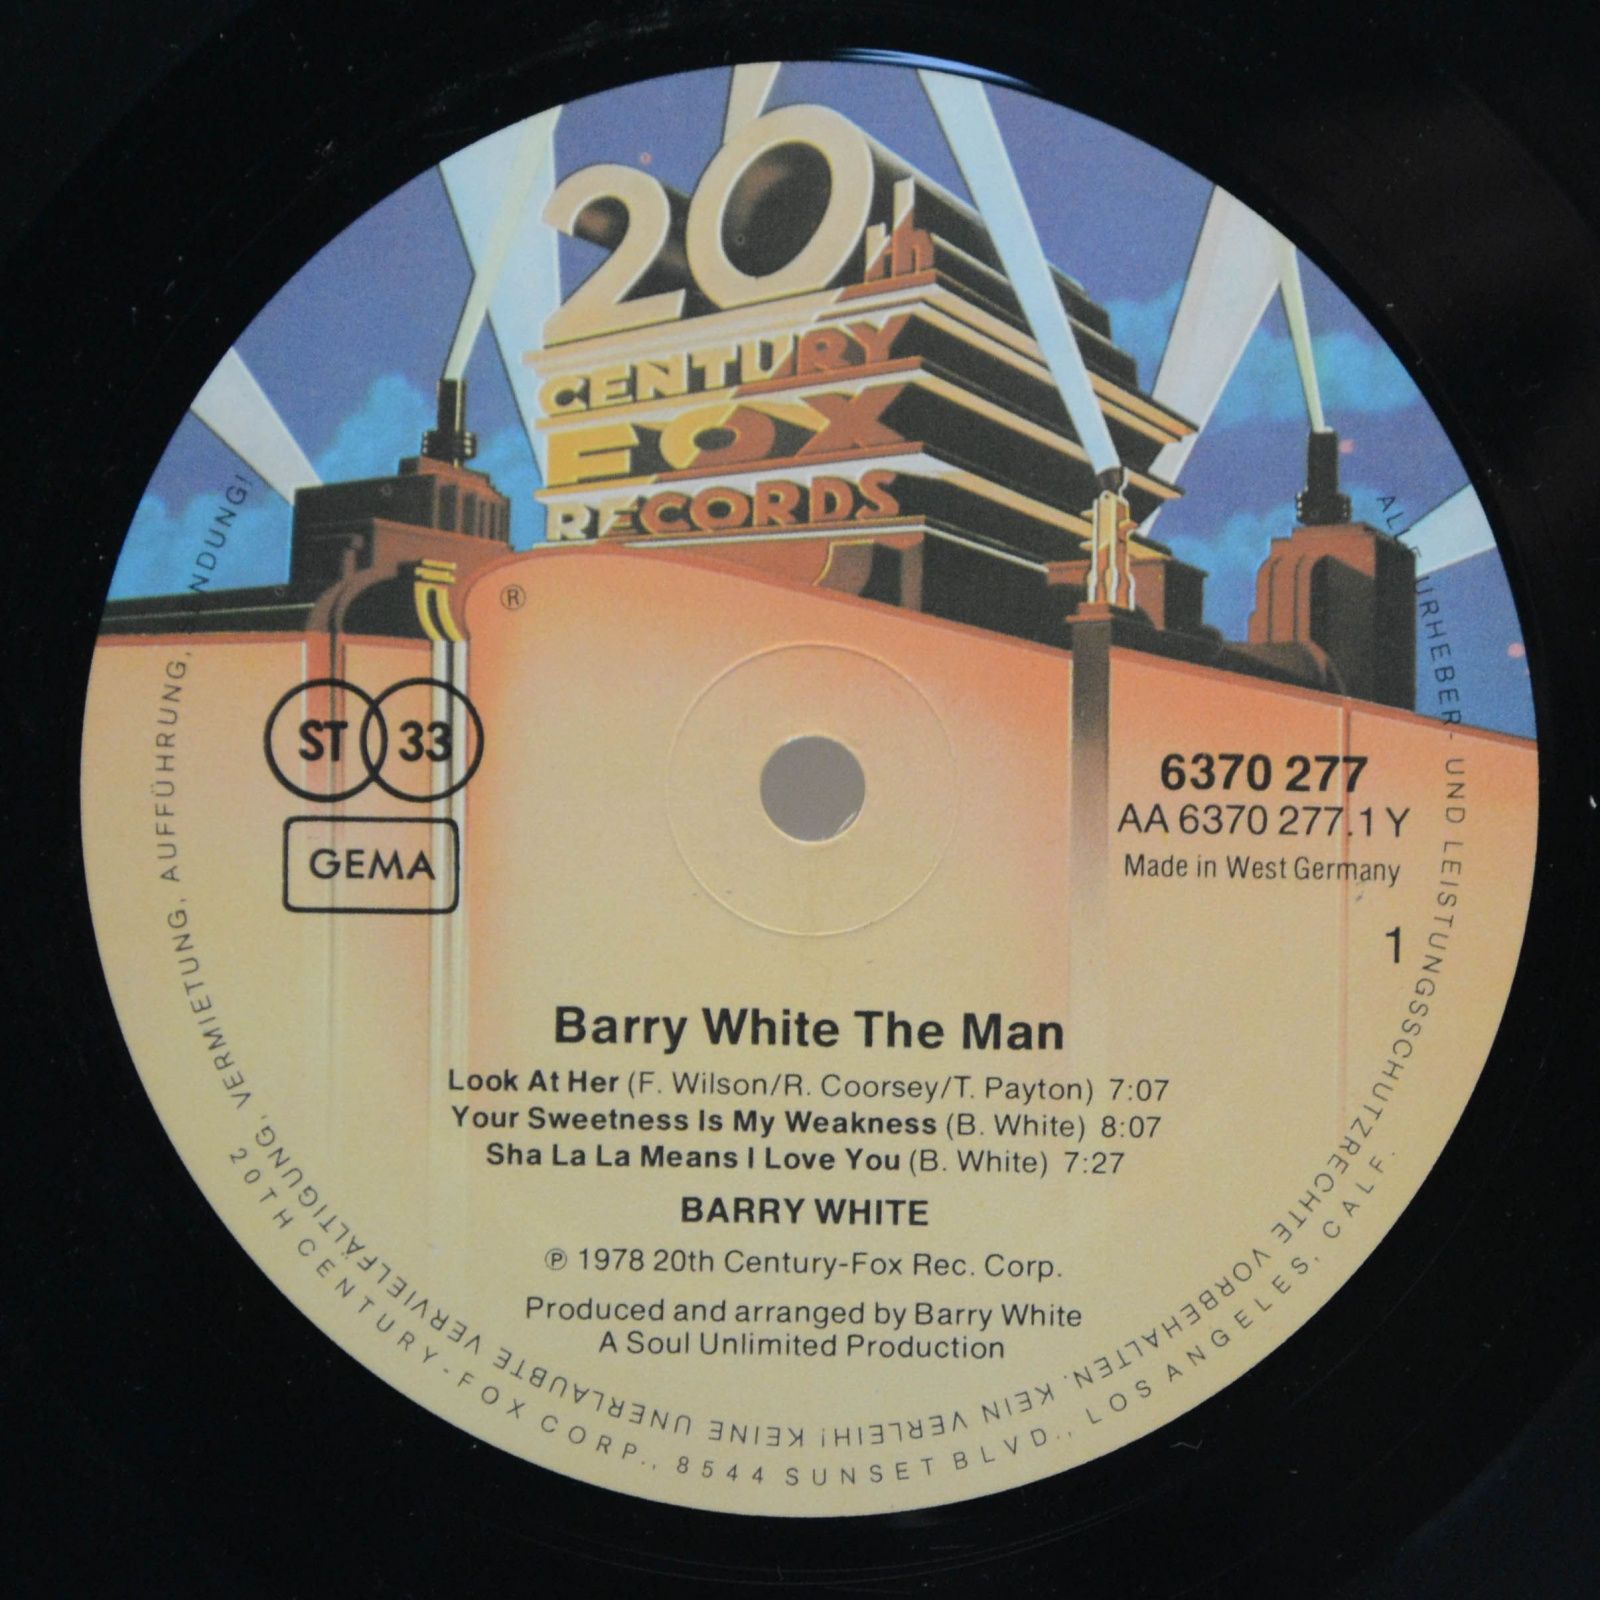 Barry White — Barry White The Man, 1978